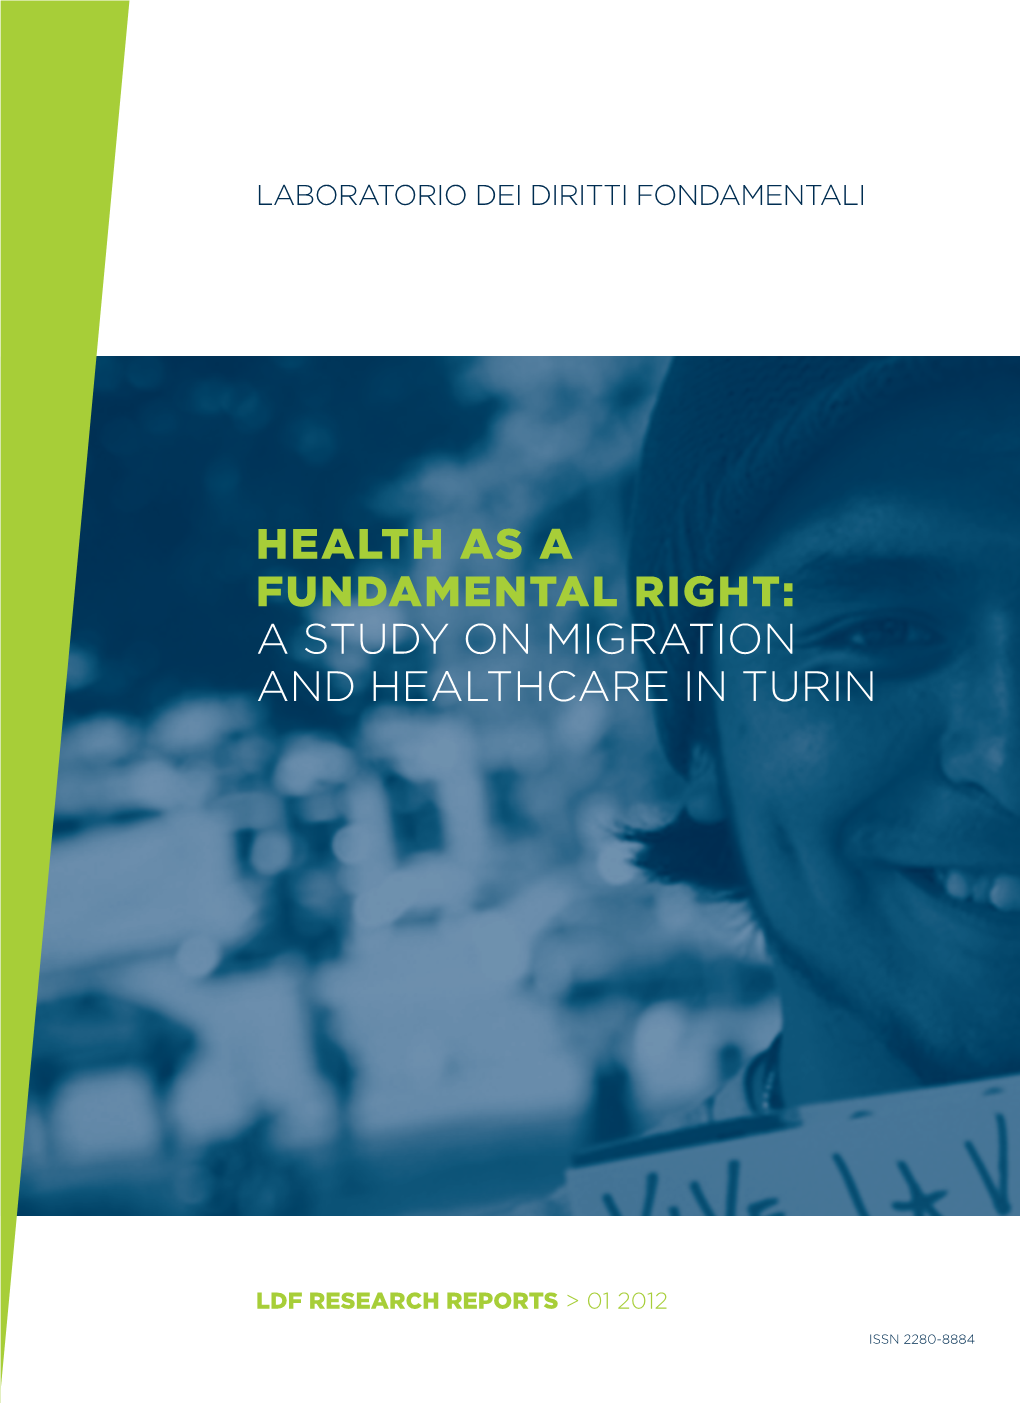 Health As a Fundamental Right: a Study on Migration and Healthcare in Turin